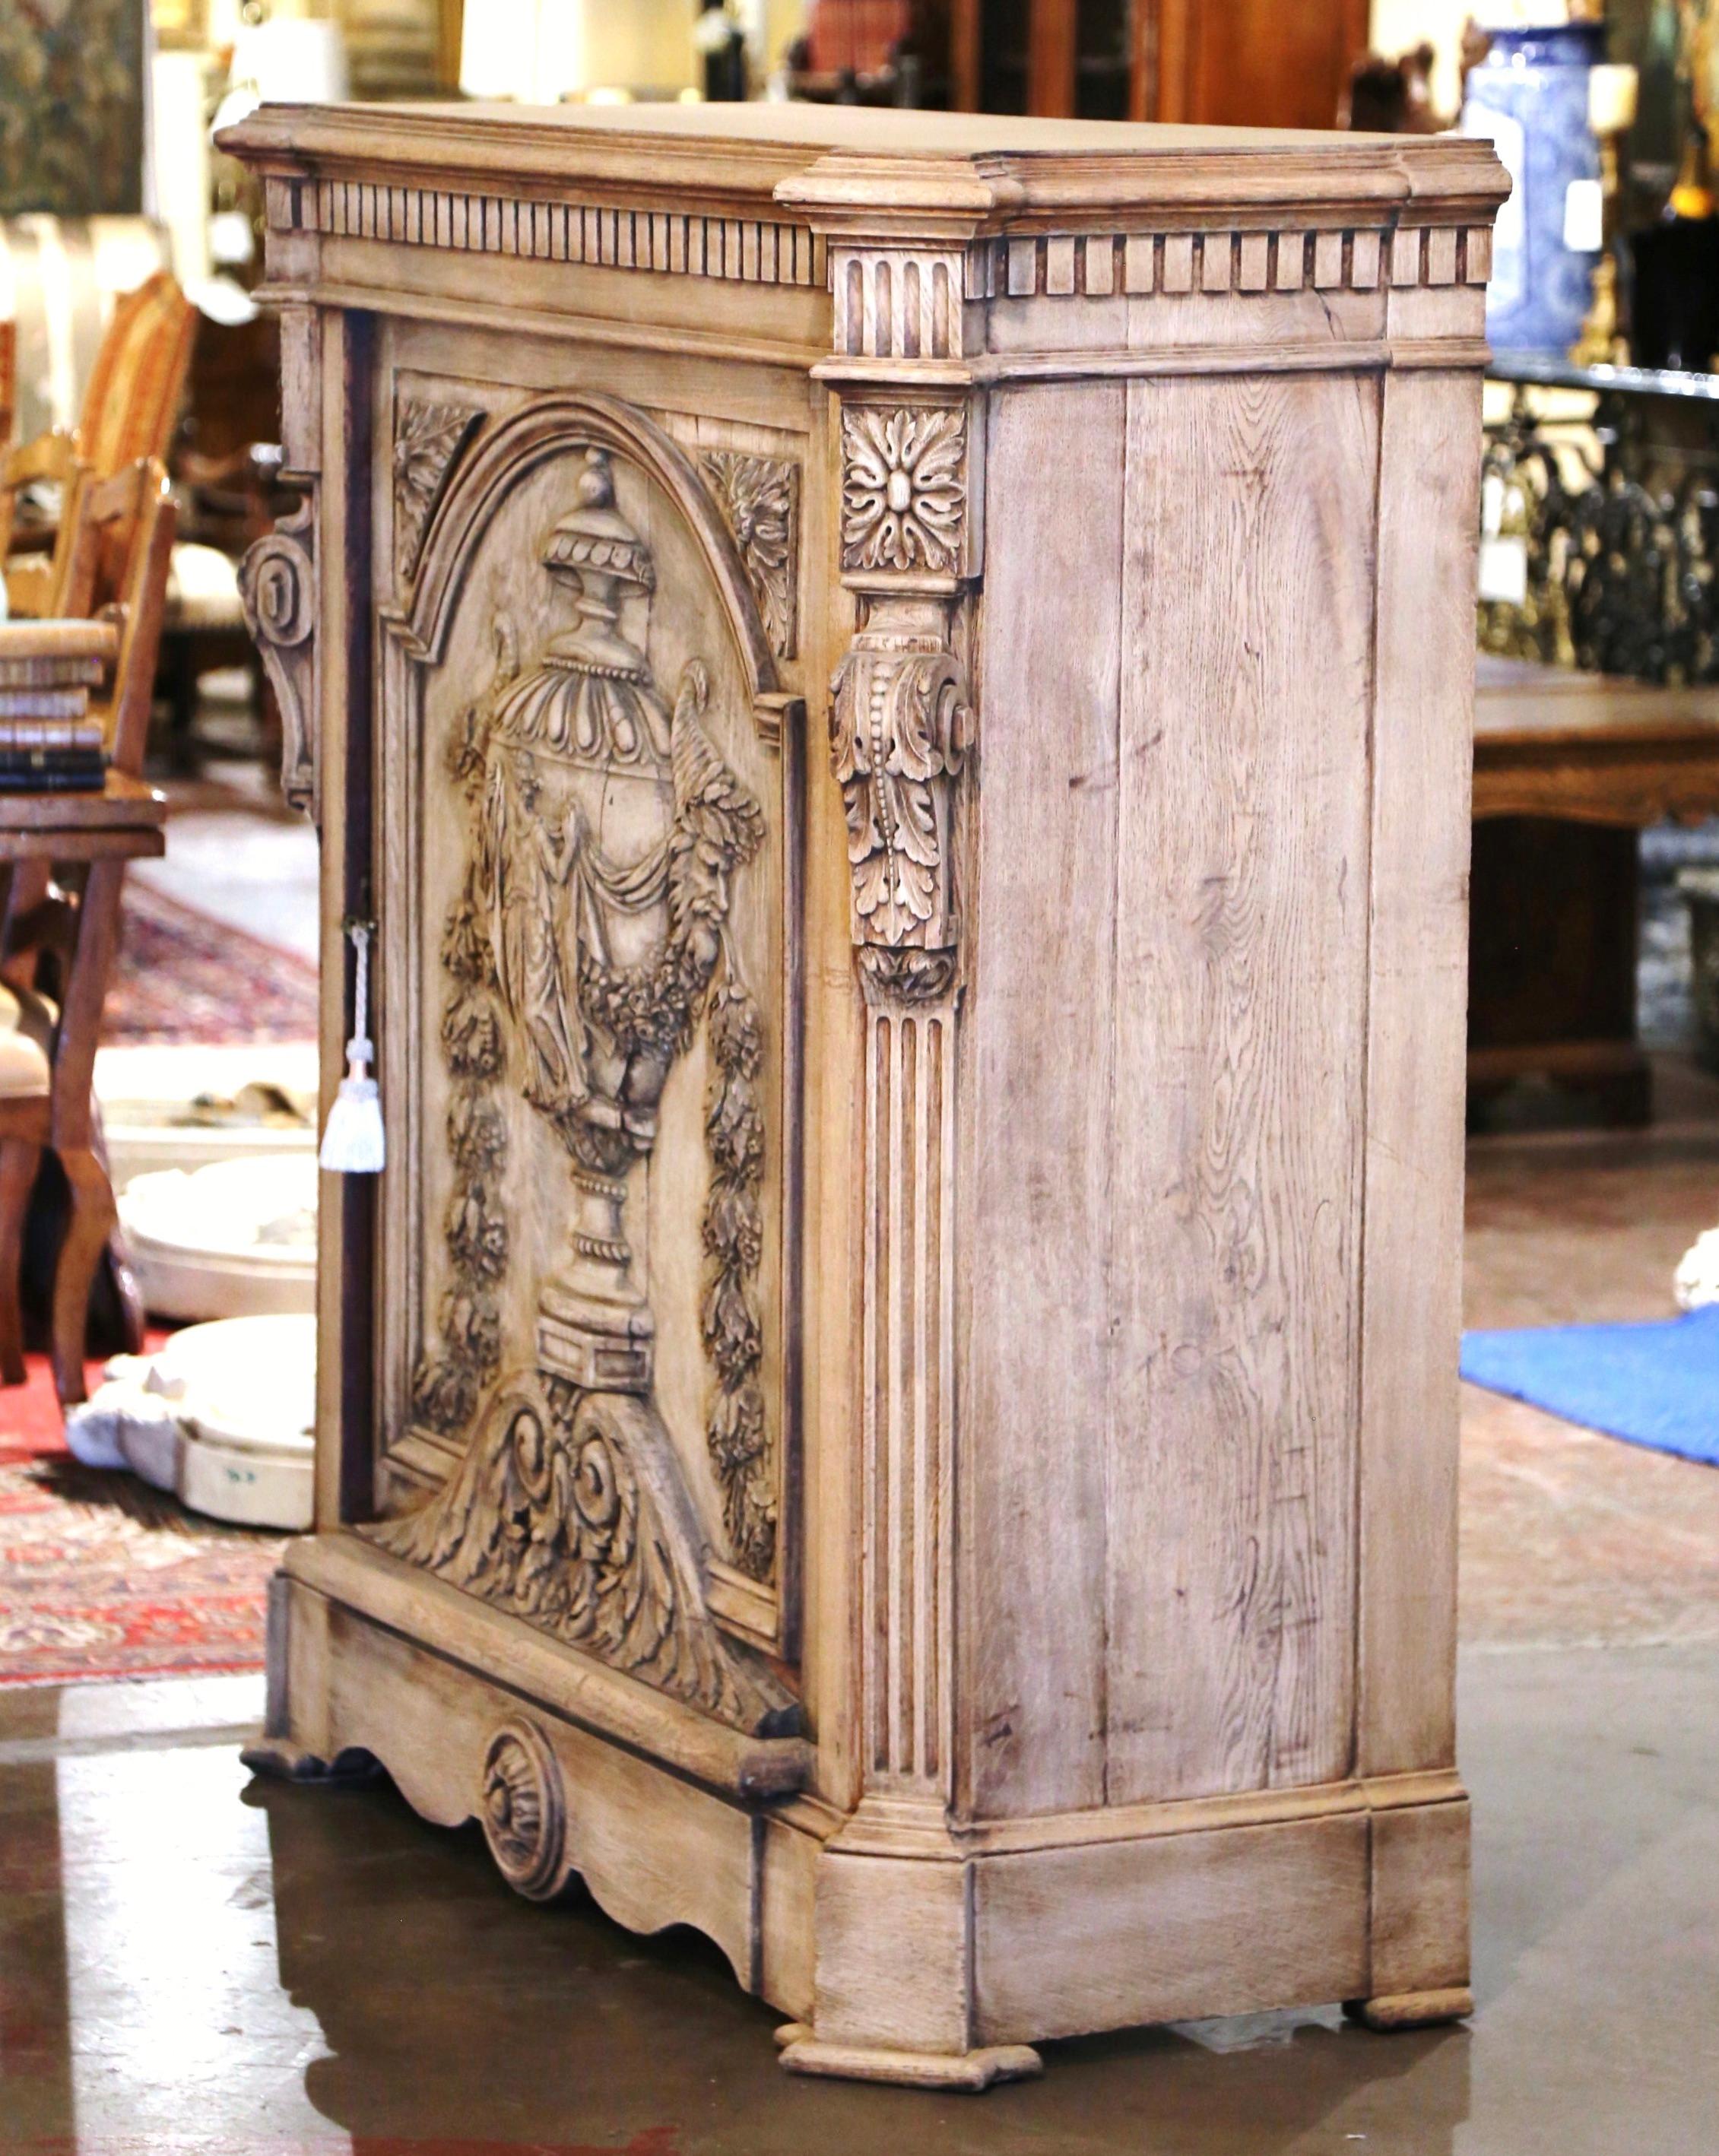 Crafted in France, circa 1870 and built of oak wood, this single door confiturier (or jelly cabinet), stands on bracket feet over a scalloped apron decorated with a center floral medallion. The antique cabinet features a large door with arched top,